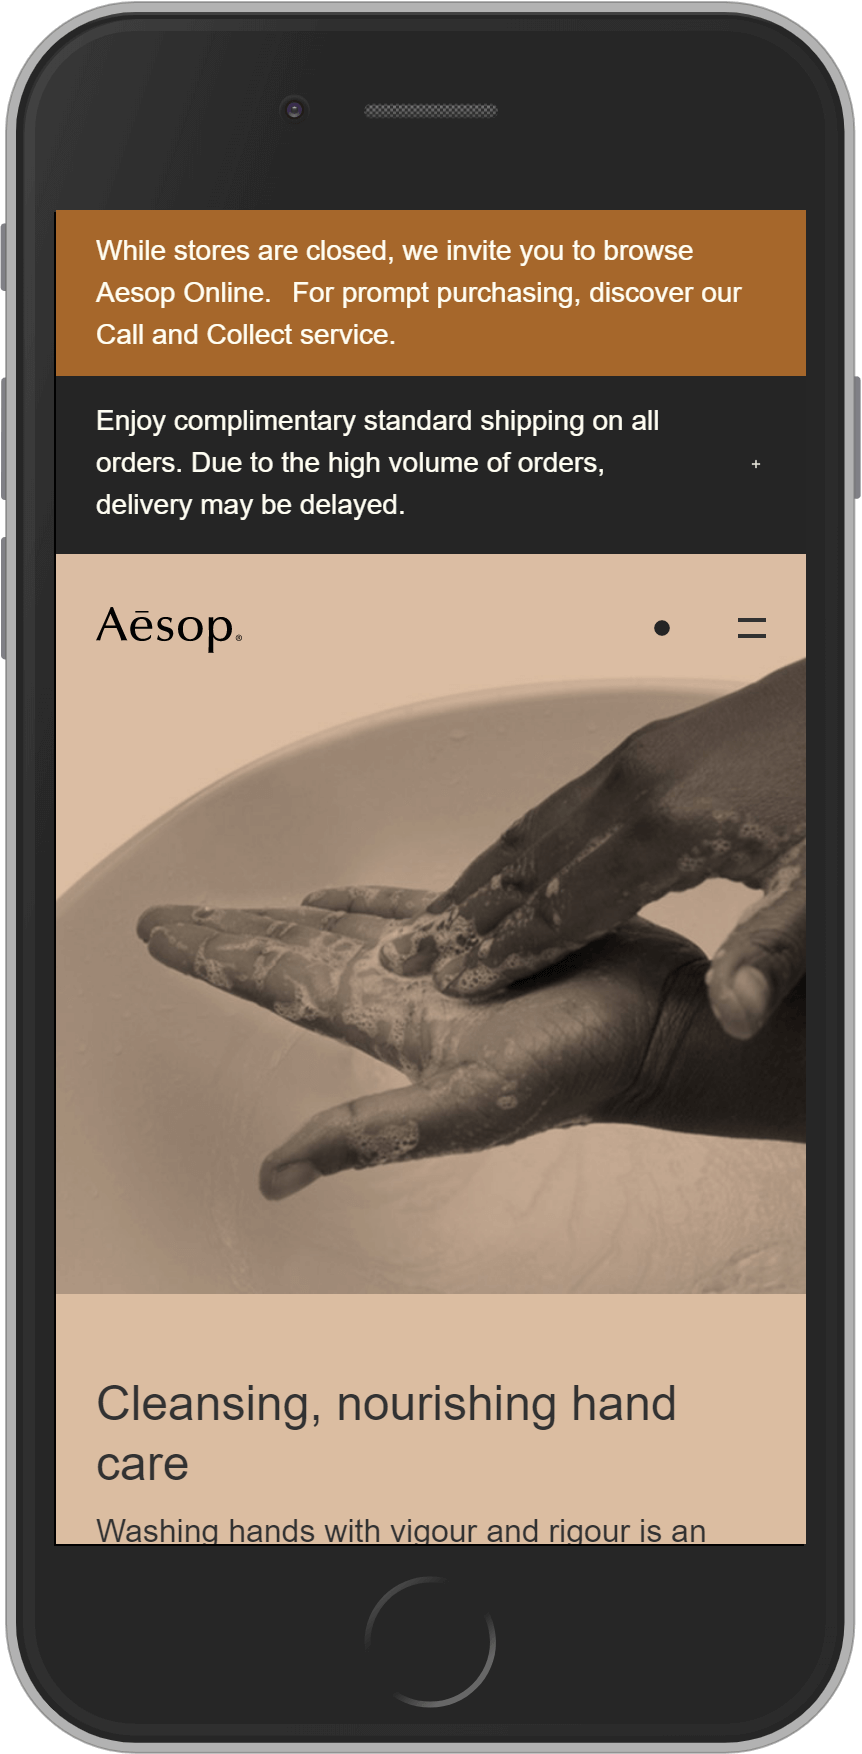 Aesop on mobile